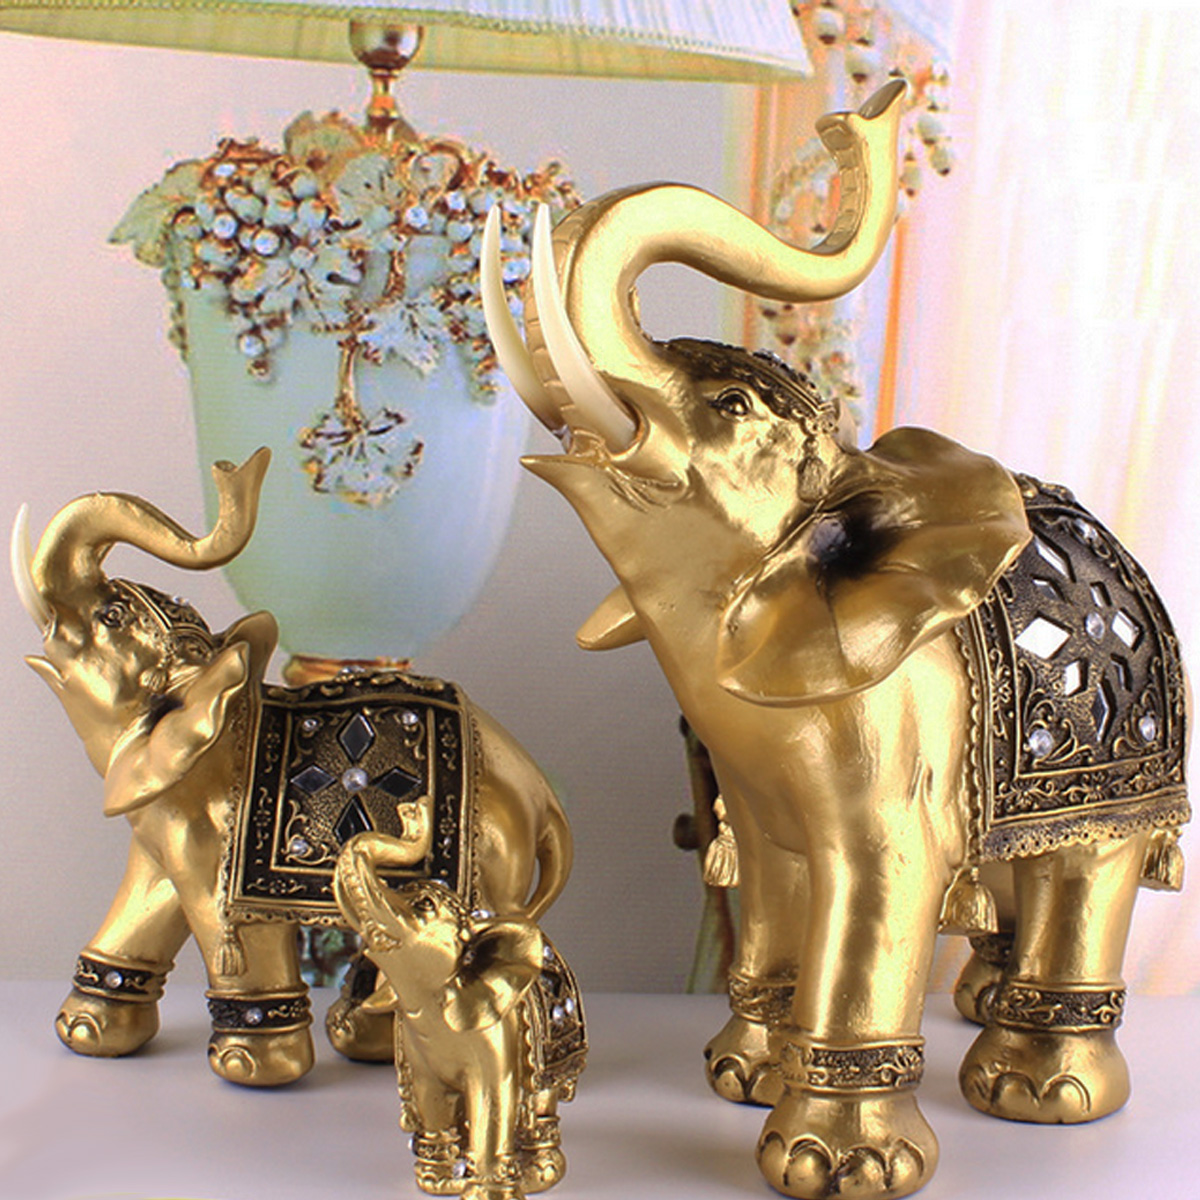 Lucky-Charm-Fengshui-Mascot-Golden-Elephant-Resin-Mini-Statue-Home-Desk-Ornaments-Gifts-Home-Decorat-1634232-5